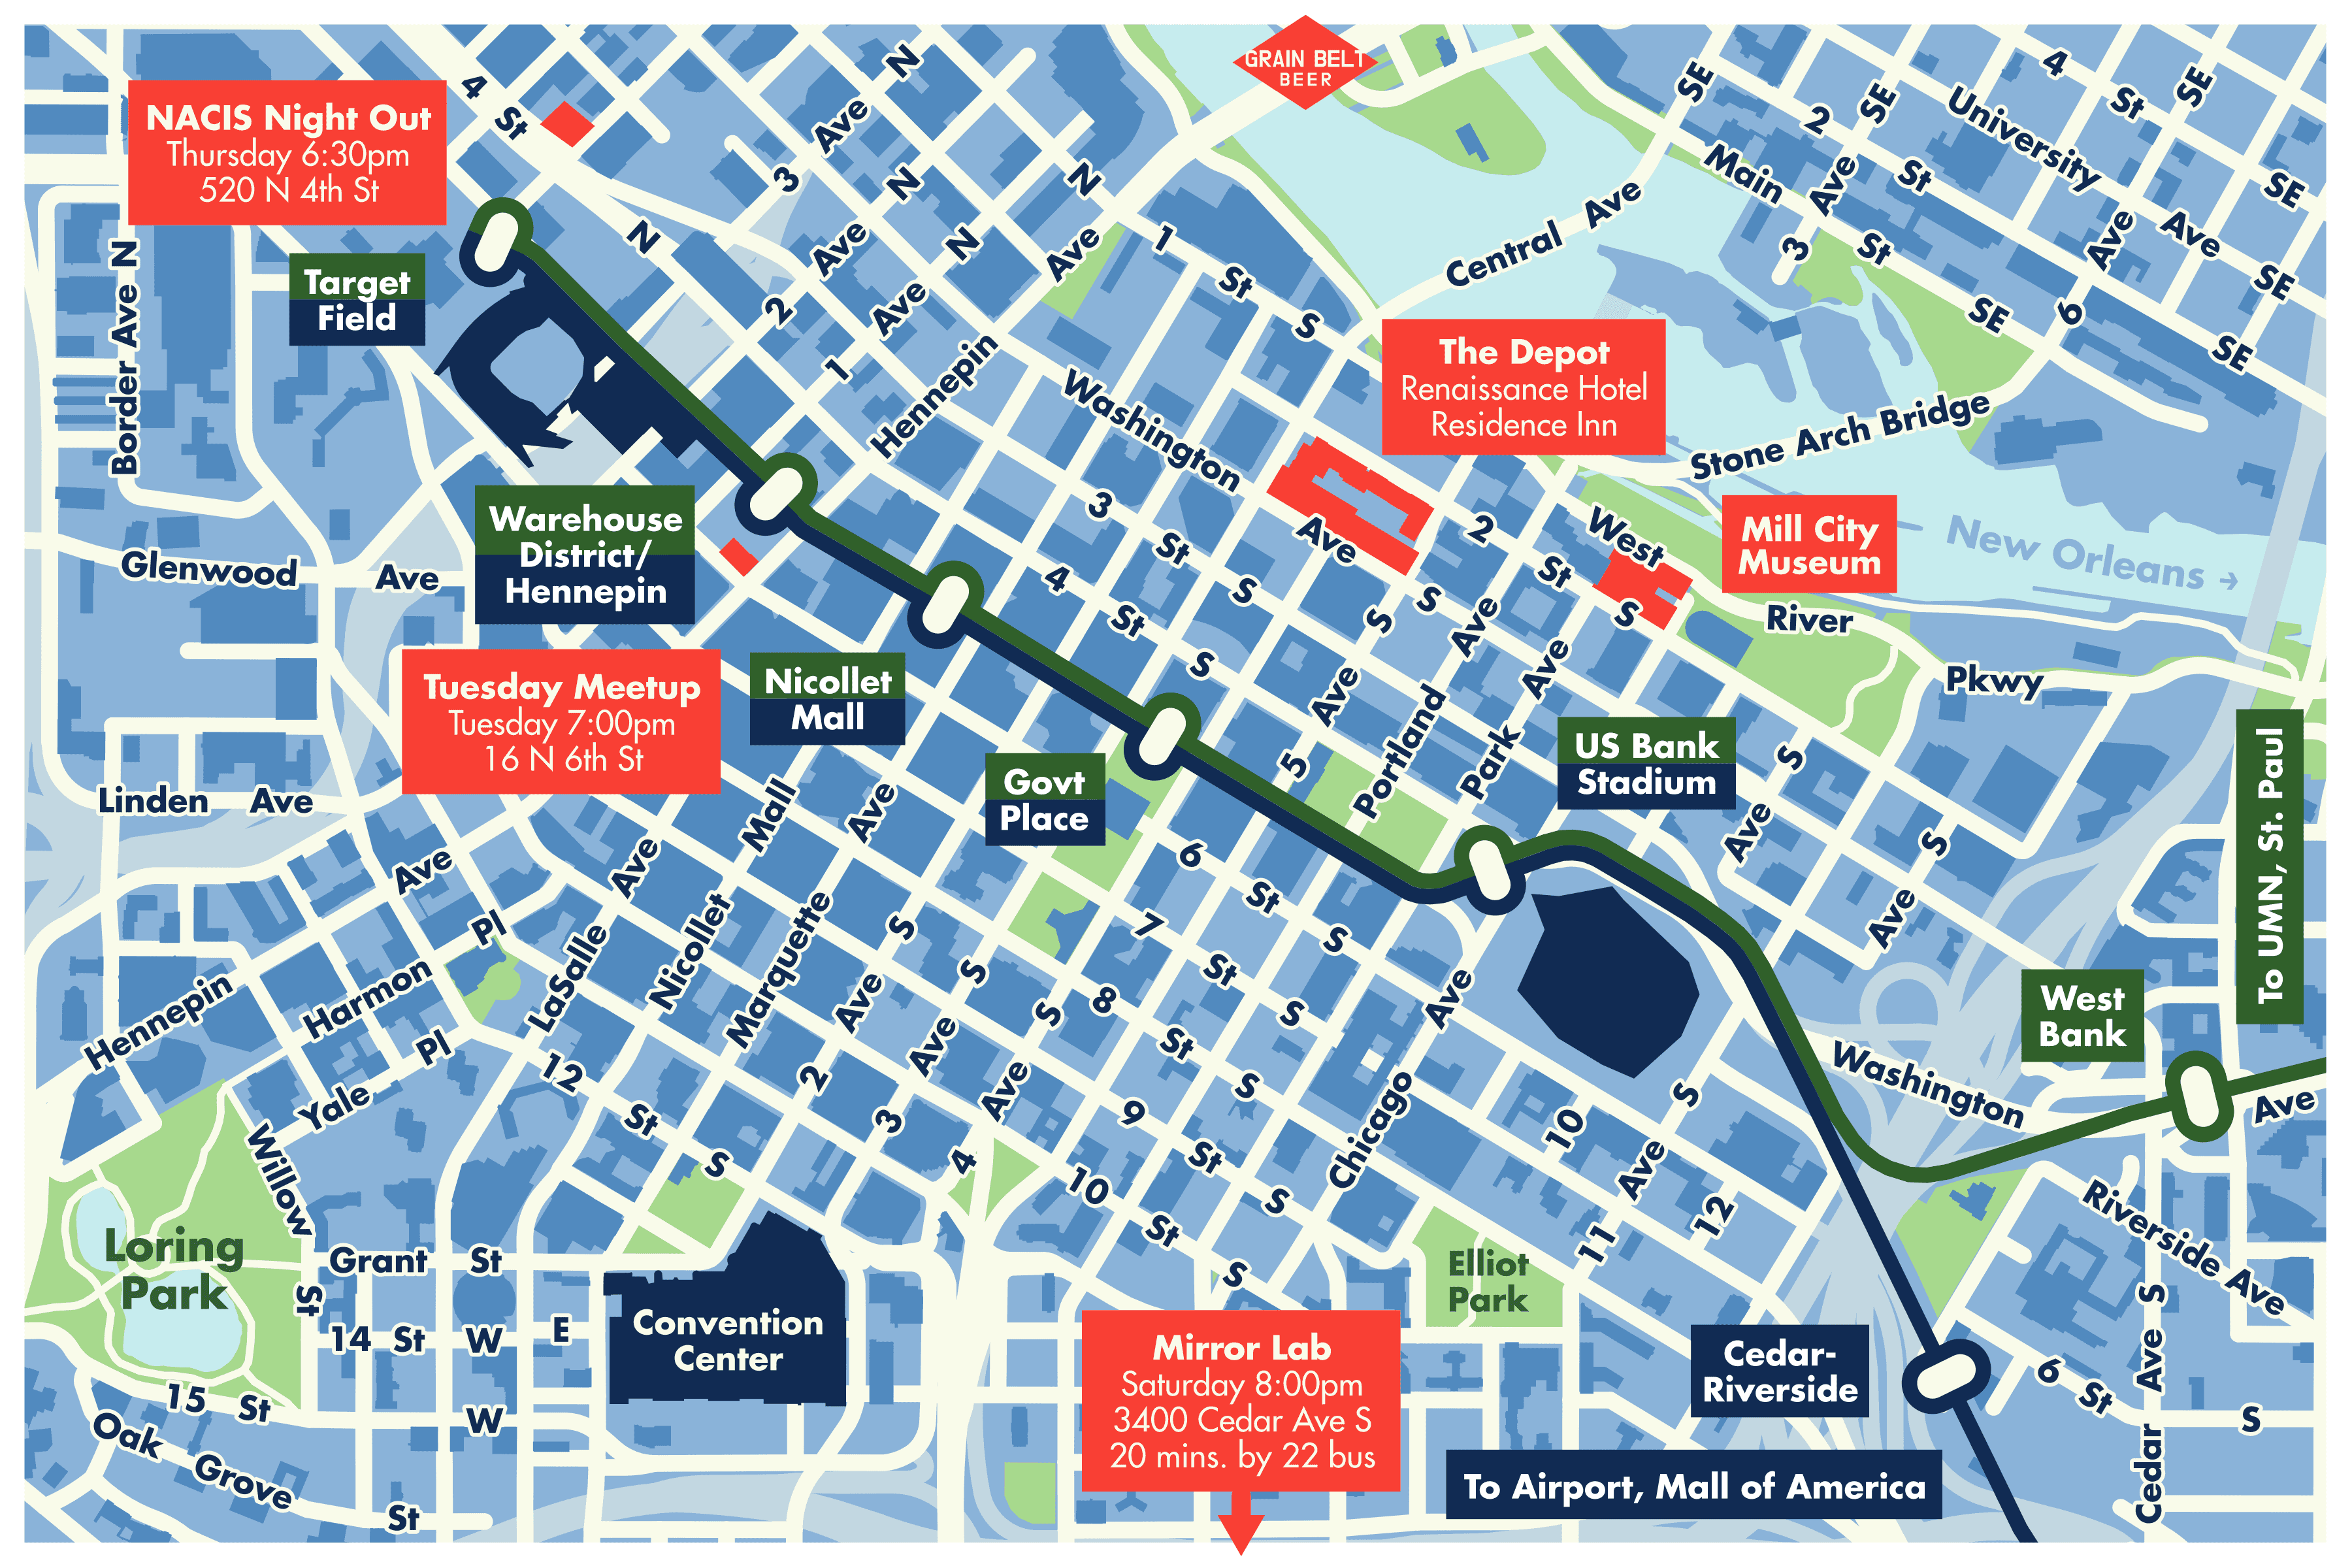 A visitor orientation map of downtown Minneapolis.